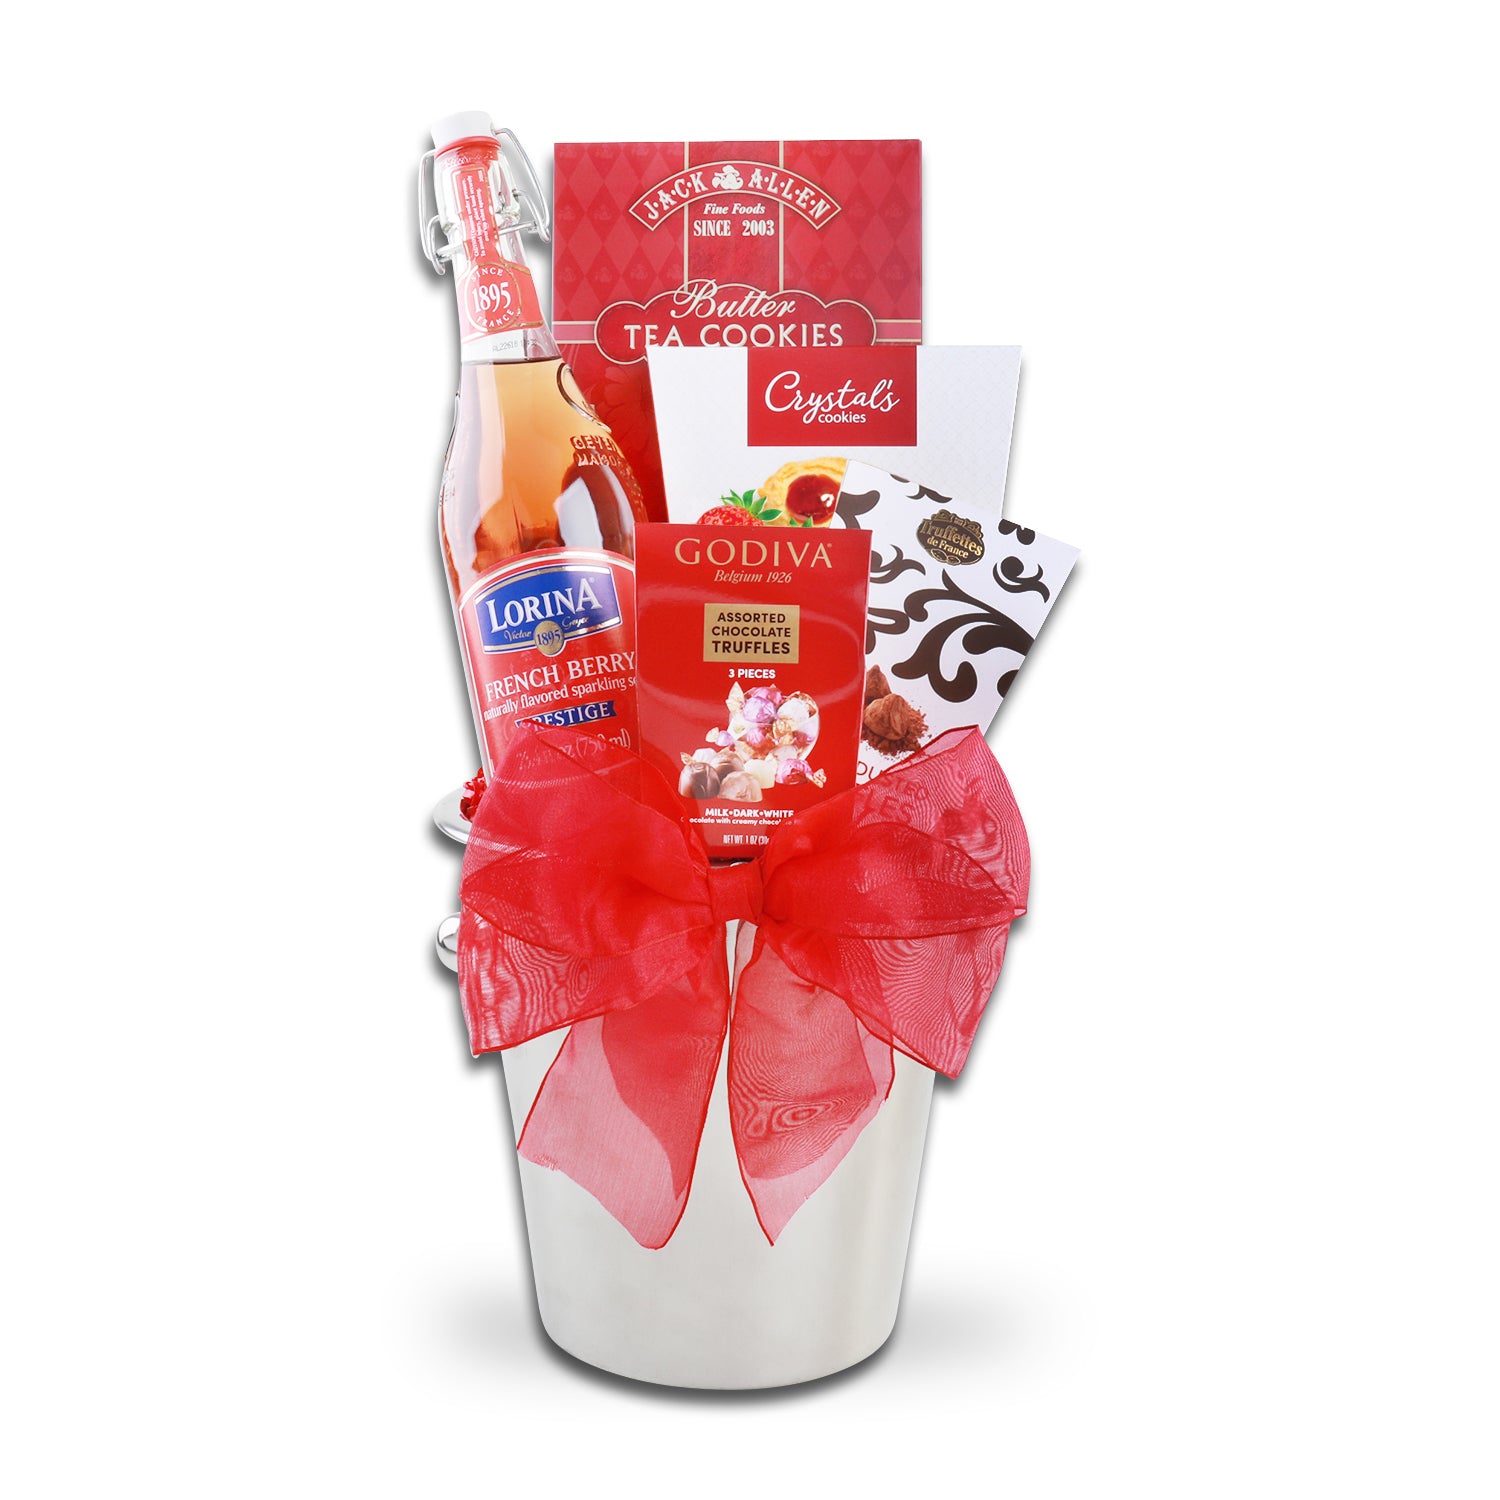 Butter Tea Cookies (3.5oz.), Crystal’s Strawberry Filled Shortbread Cookies (2.5oz.), Cocoa Dusted Truffles (1.4oz.), Godiva Assorted Chocolate Truffles (3pcs.), Lorina Sparkling Berry Cider (750ml.), Reusable Silver Ice Bucket